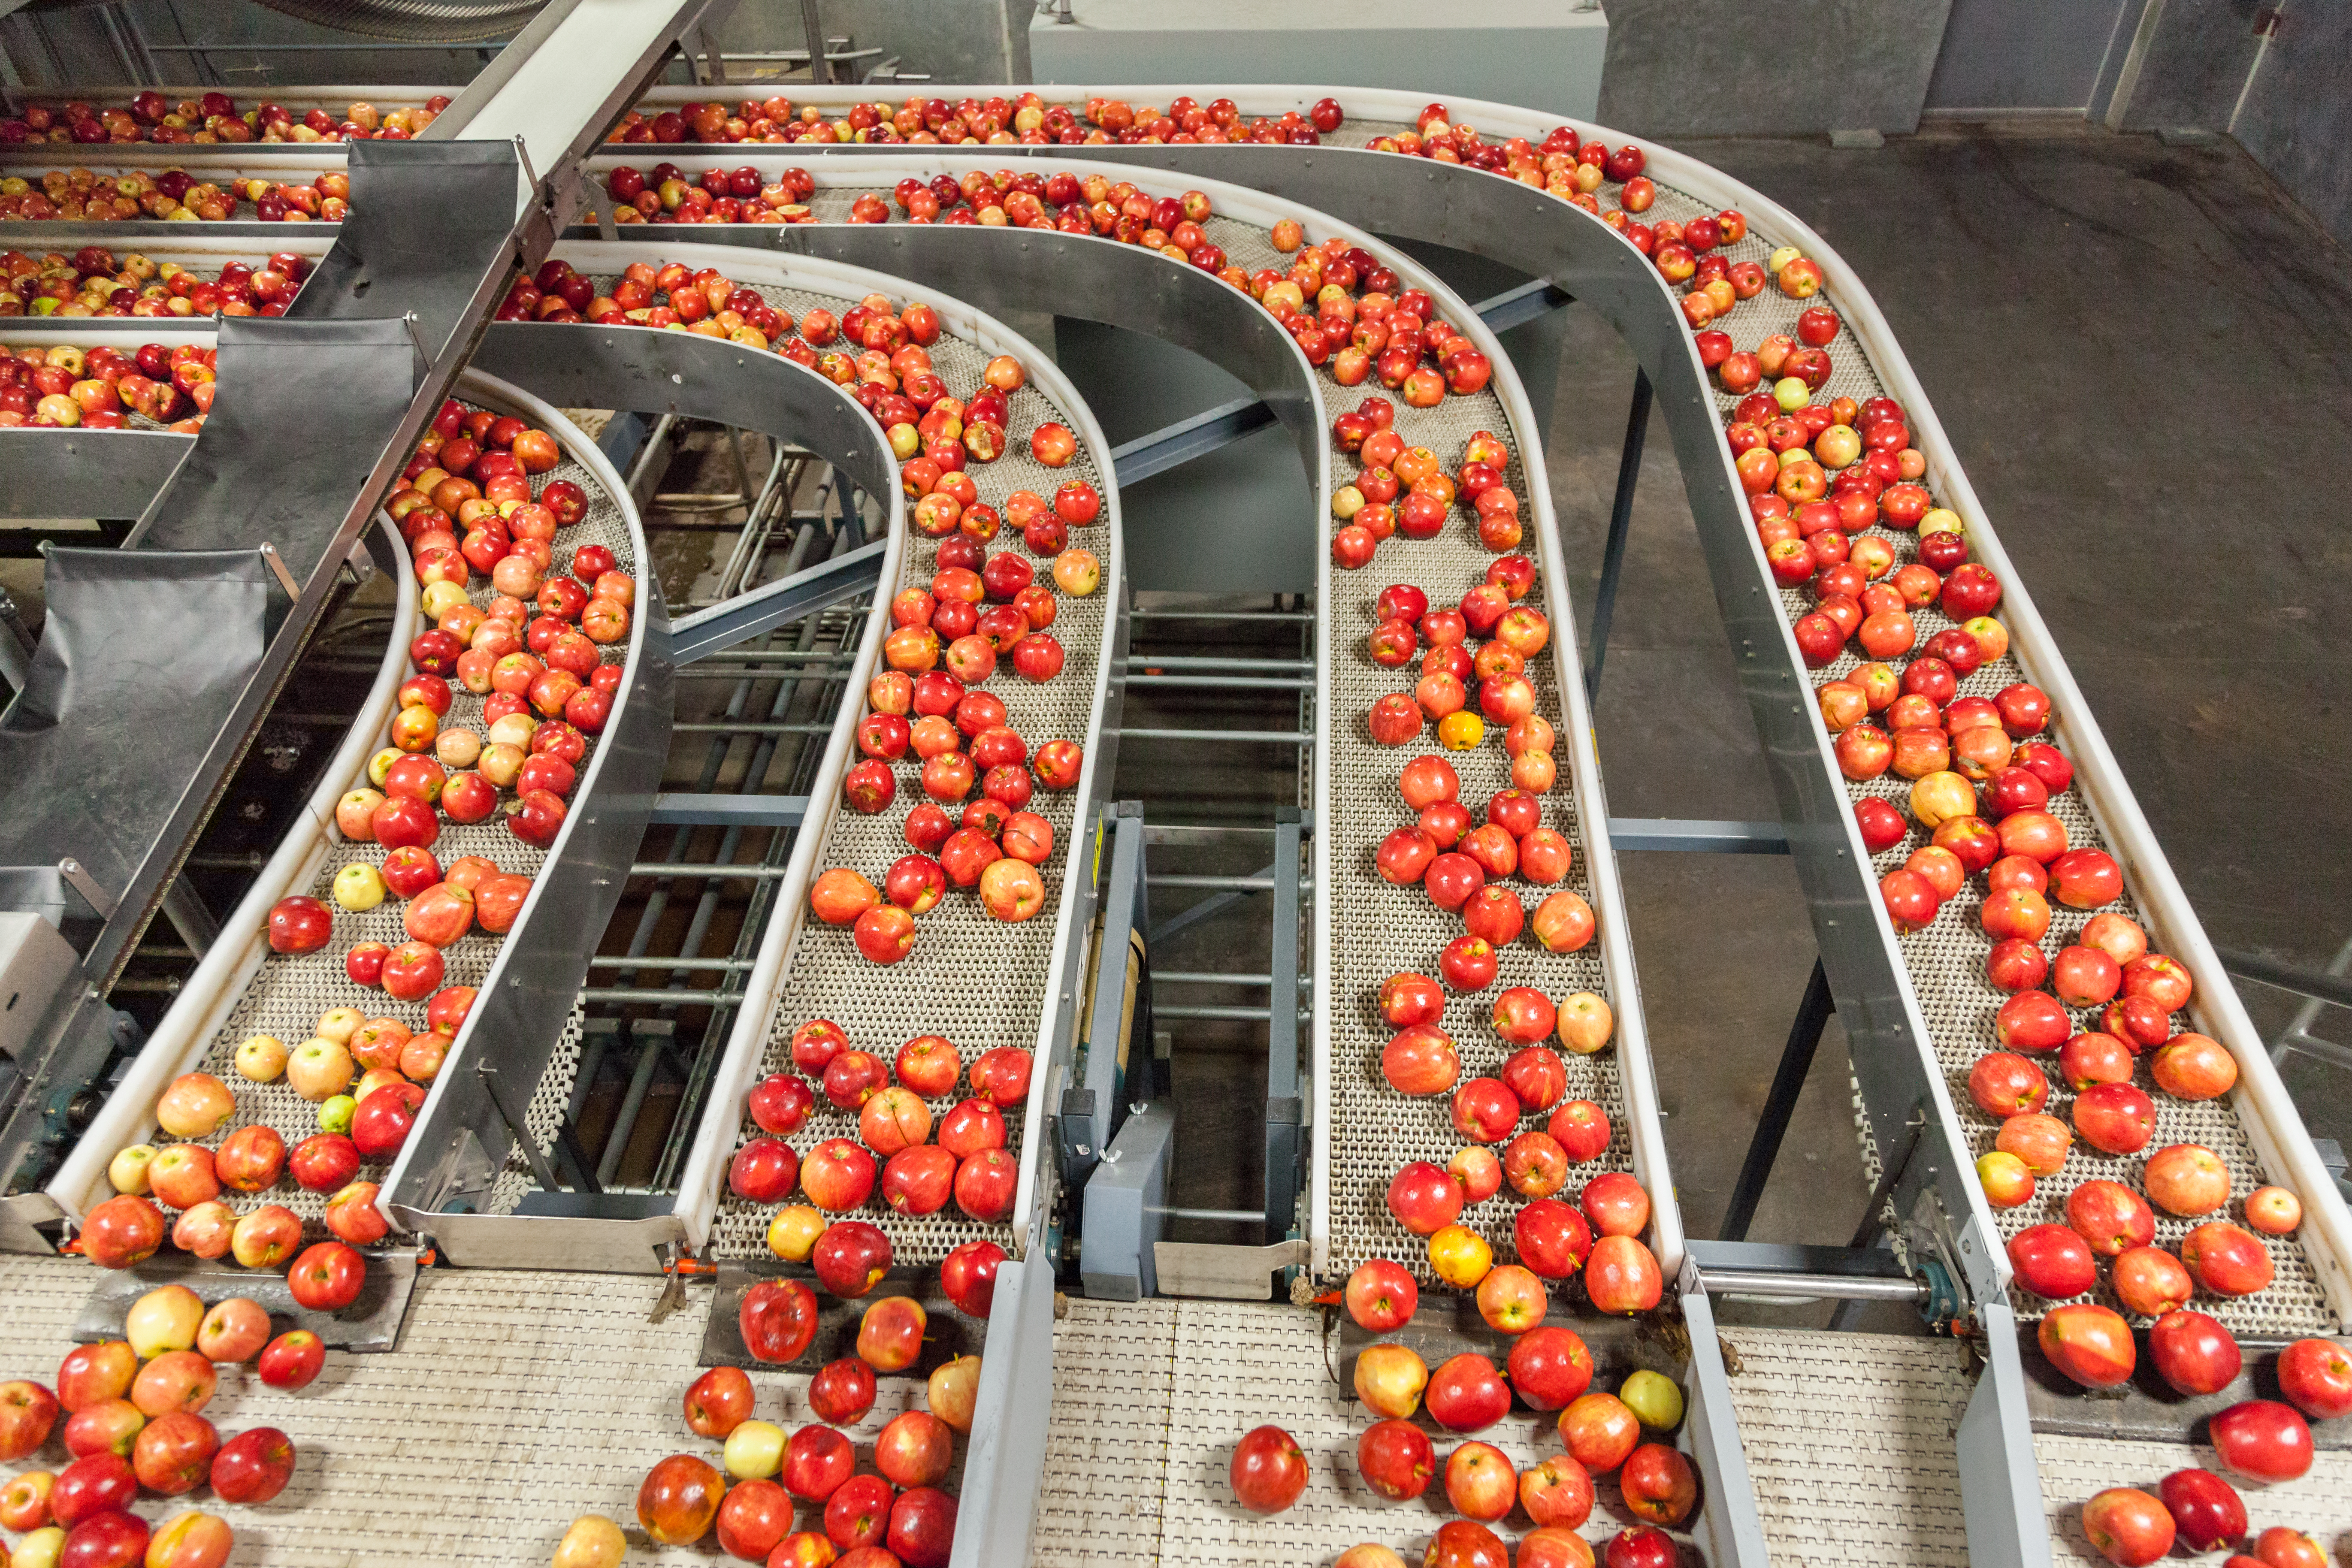 Apples being sorted at a factory